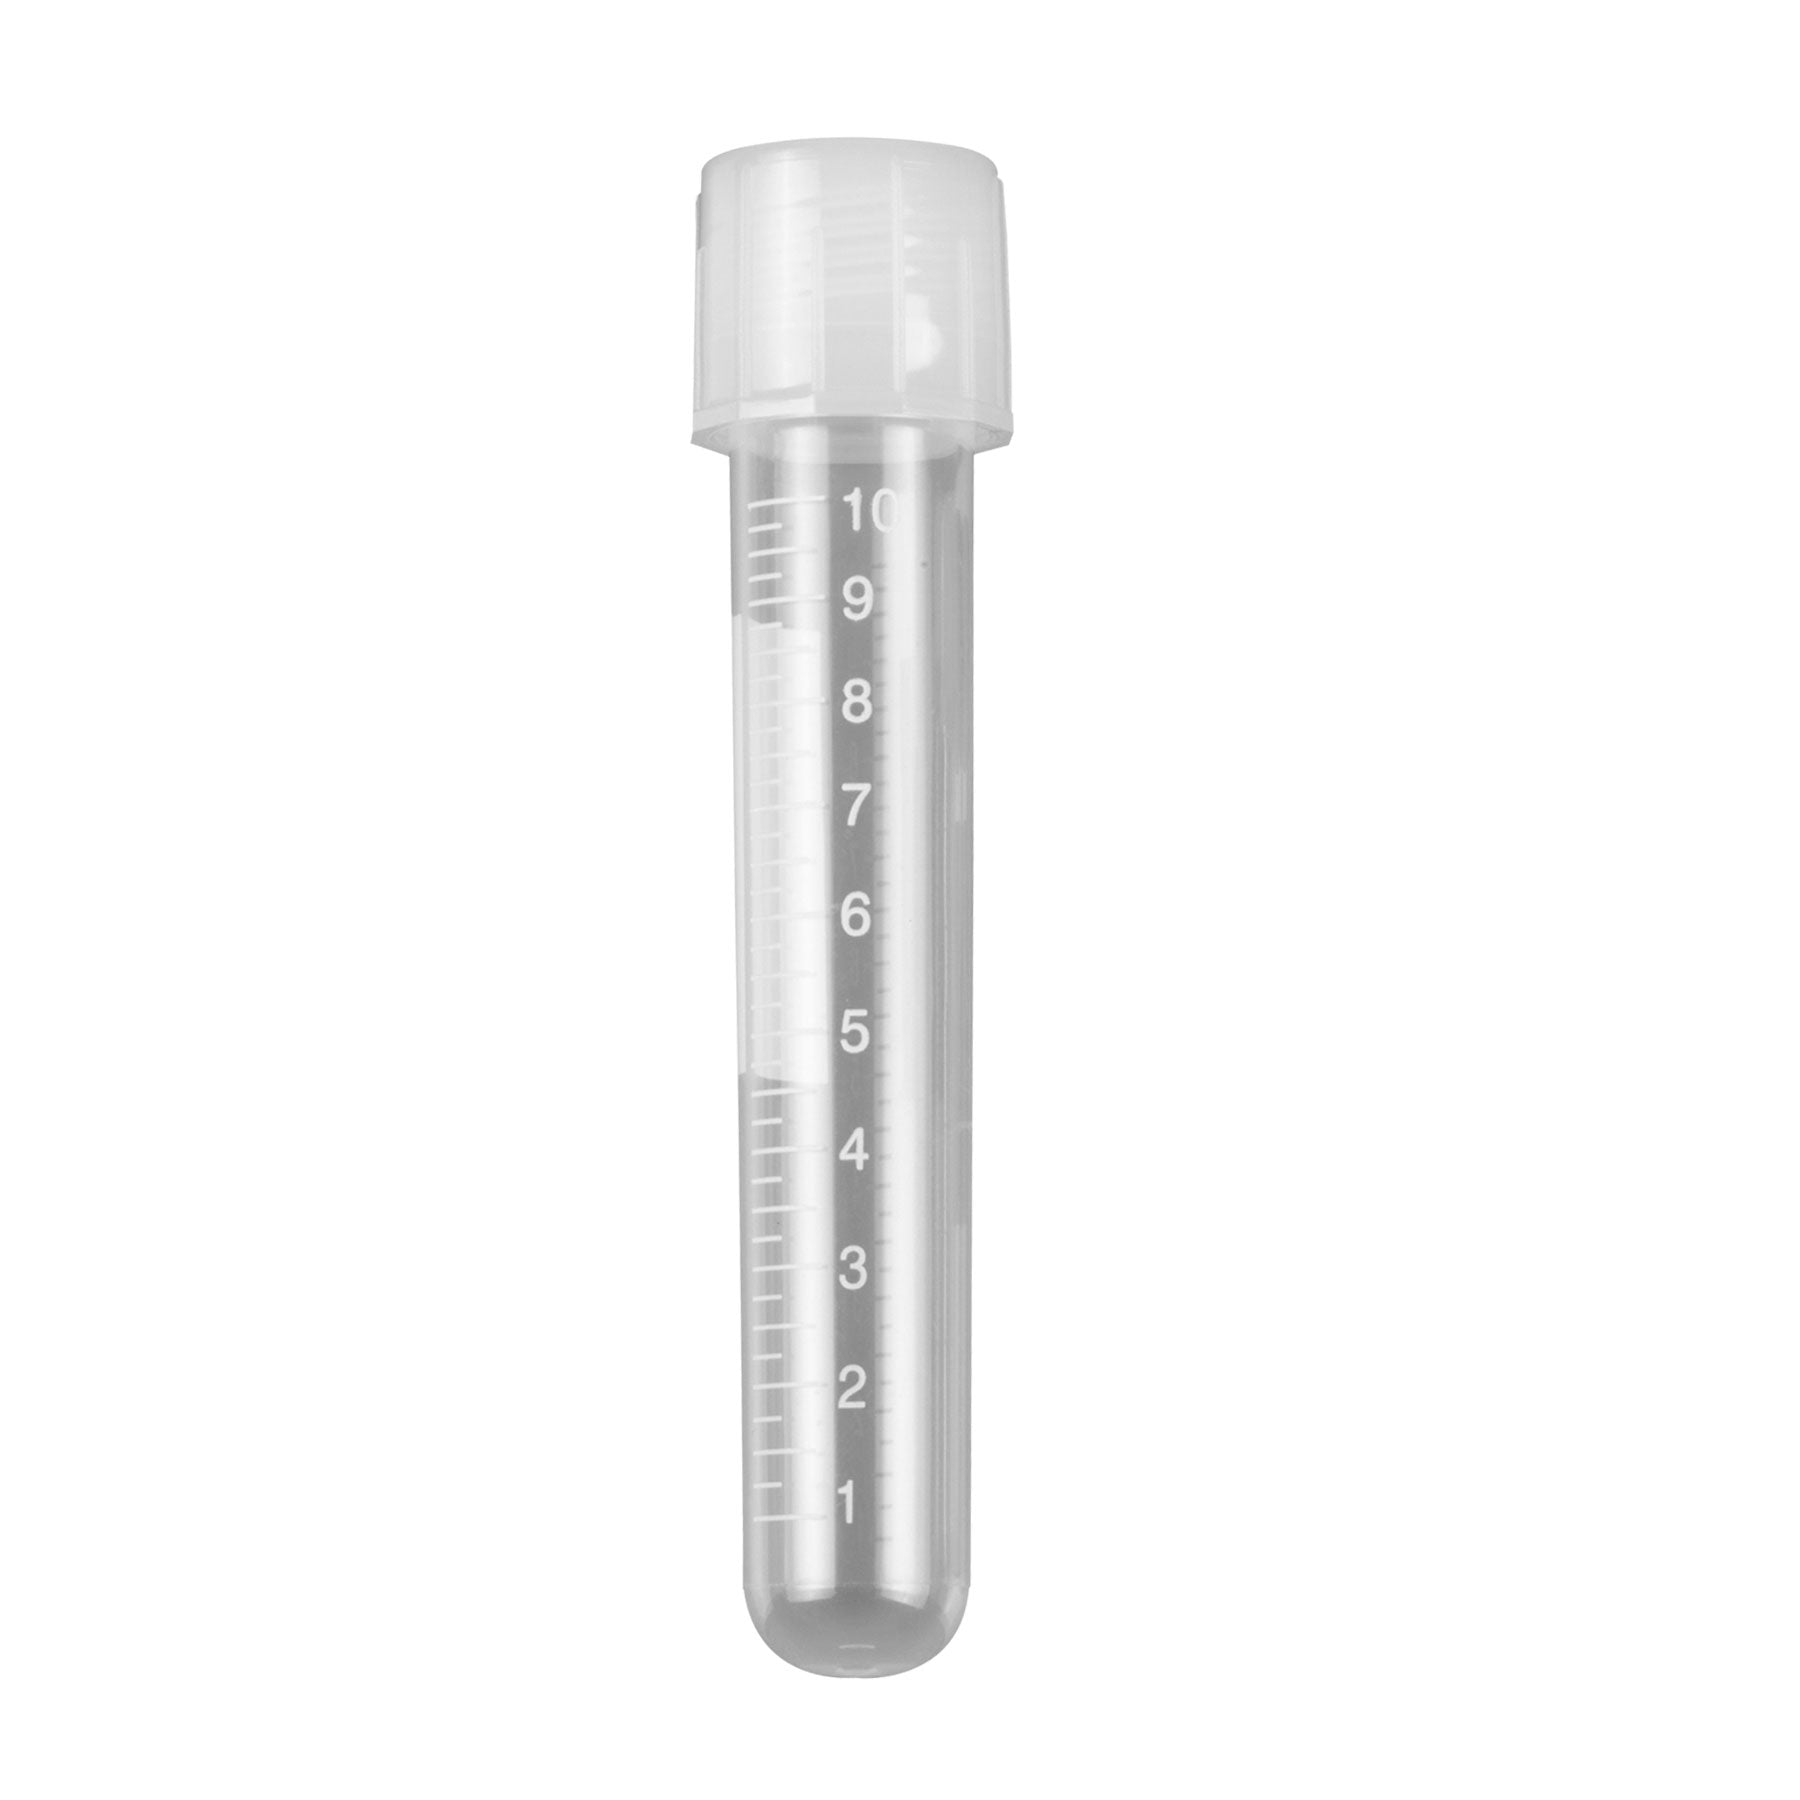 MTC Bio T8830, DuoClick Culture Tube, 14ml, 17 X 100Mm, PP, with Attached 2-Position Screw-Cap, Printed Graduations, Sterile, 20 Bags Of 25 Tubes, 500/Case